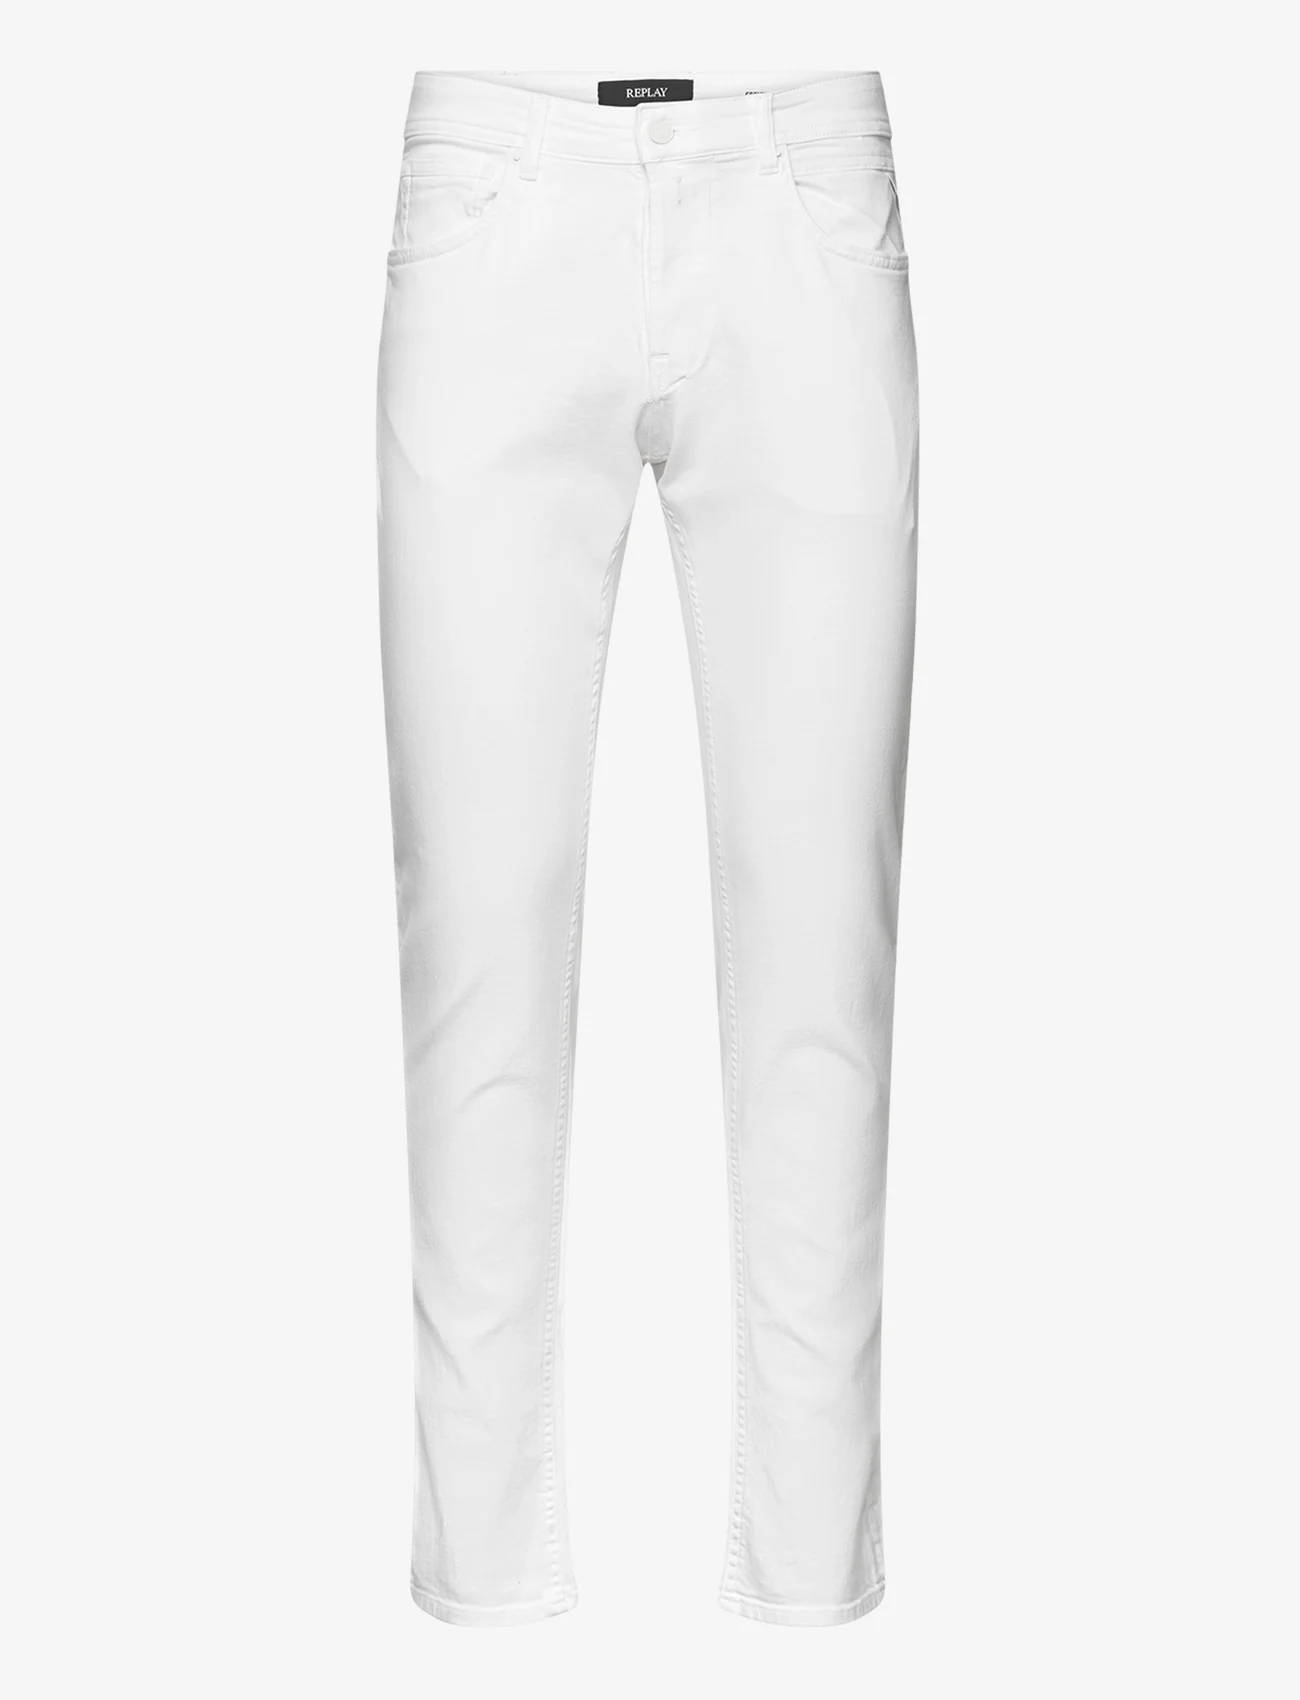 Replay - GROVER Trousers STRAIGHT - skinny jeans - white - 0